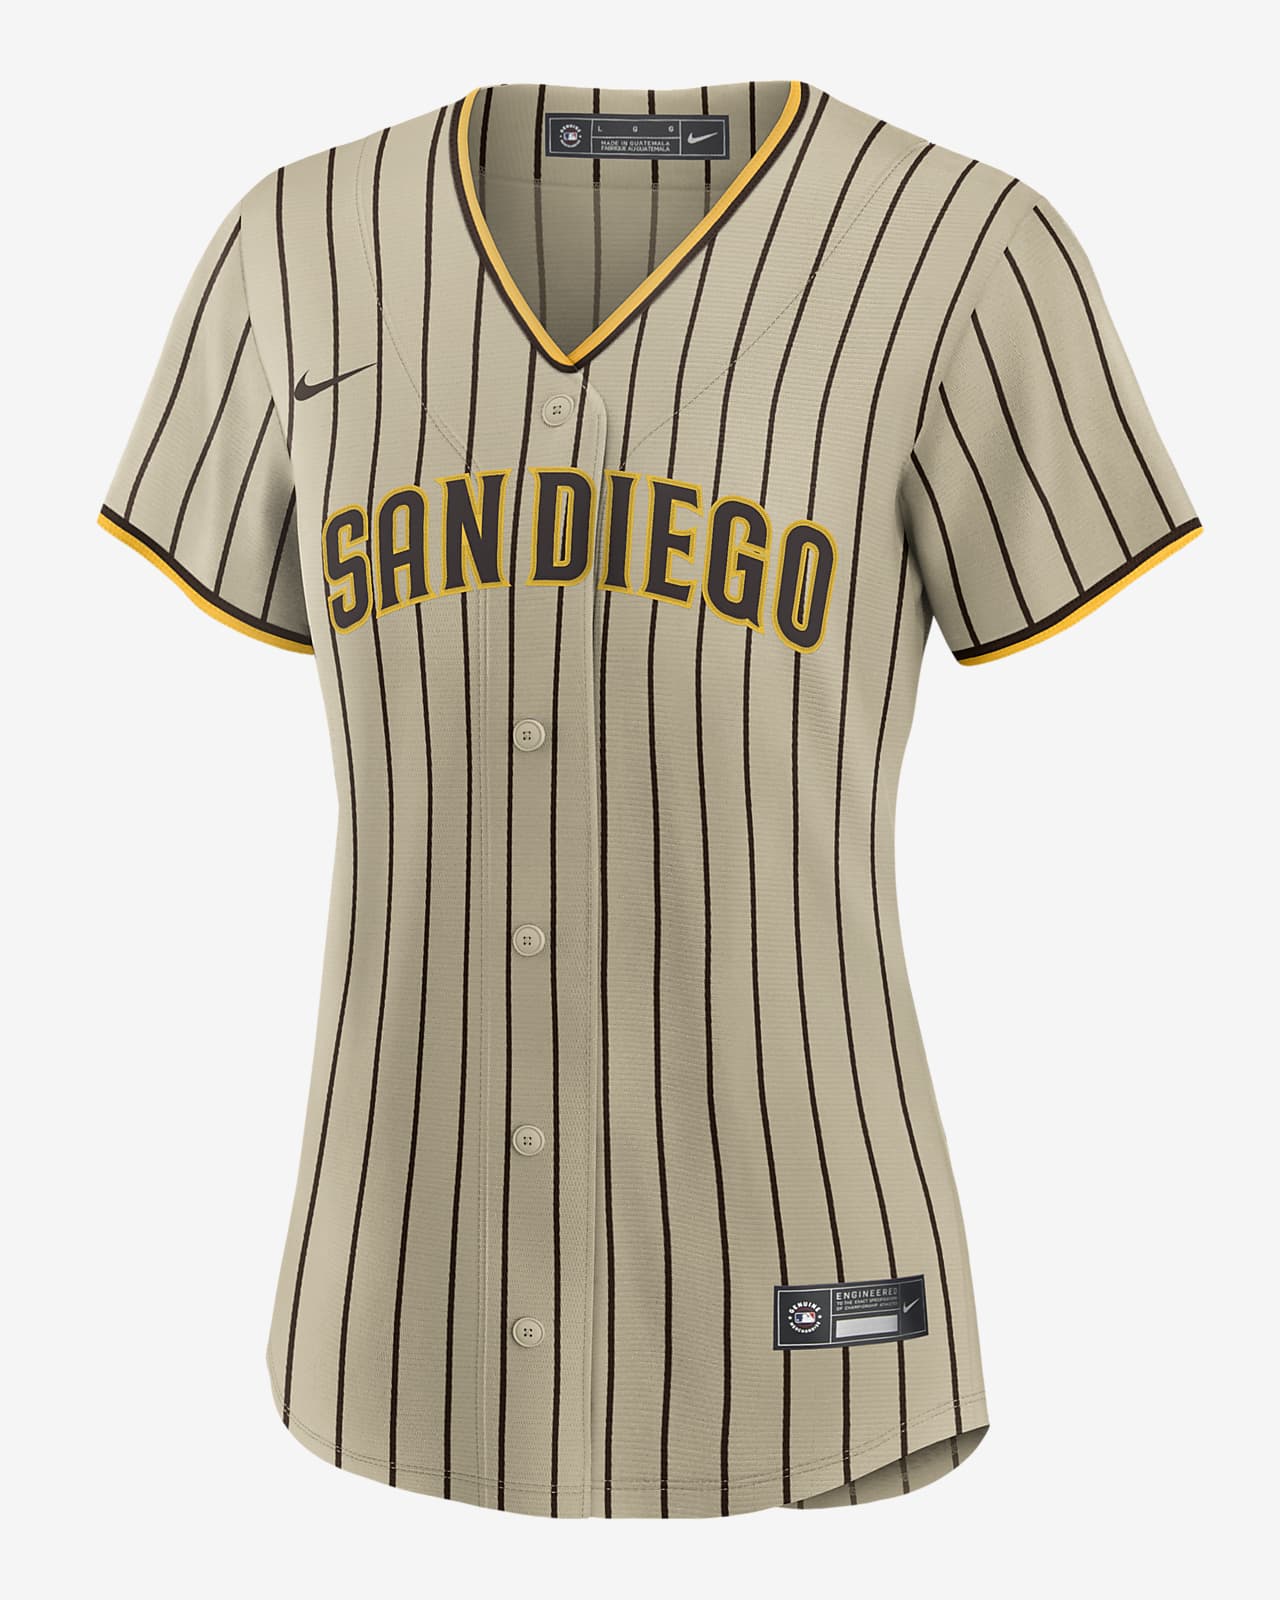 yellow padres jersey